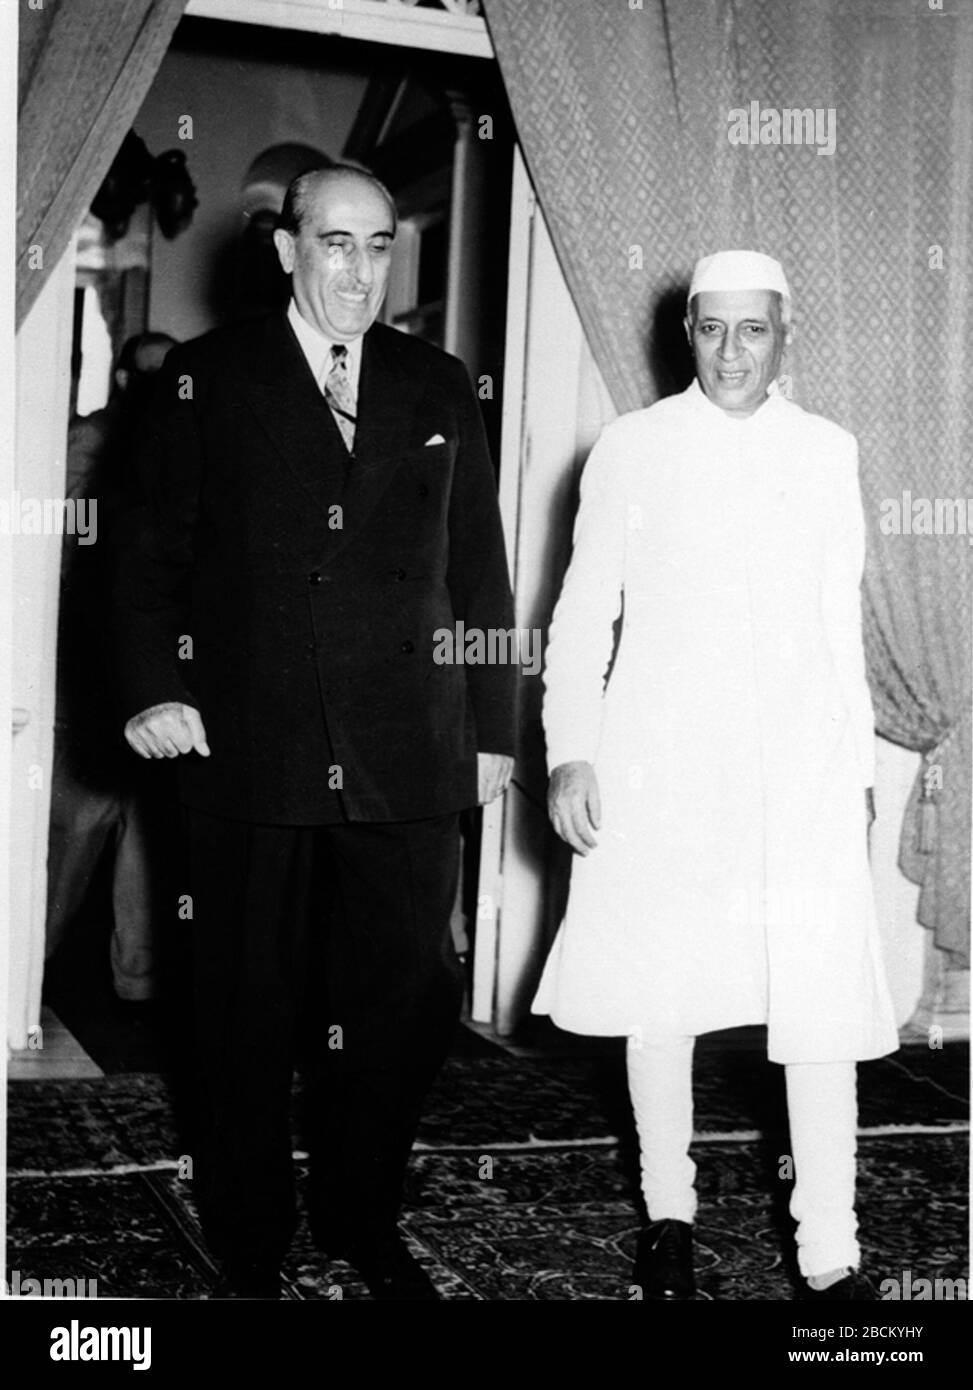 'English: Ph. E.A. Miny./June, 1957, A22a(i)P.M. IN DAMASCUS, JUNE, 1957:President Shukri al-Kuwatly, conducting the Prime Minister, Shri Jawaharlal Nehru, to the Banquet Hall in the Presidential Palace on the occasion of the State Banquet given by the Syrian President Presidential Palace on the occasion of the State Banquet given by the Syrian President in honour of Shri Jawaharlal Nehru during his visit to Syria.; June 1957; http://photodivision.gov.in/writereaddata/webimages/thumbnails/59564.jpg; Photo Division, Ministry of Information & Broadcasting, Government of India; ' Stock Photo